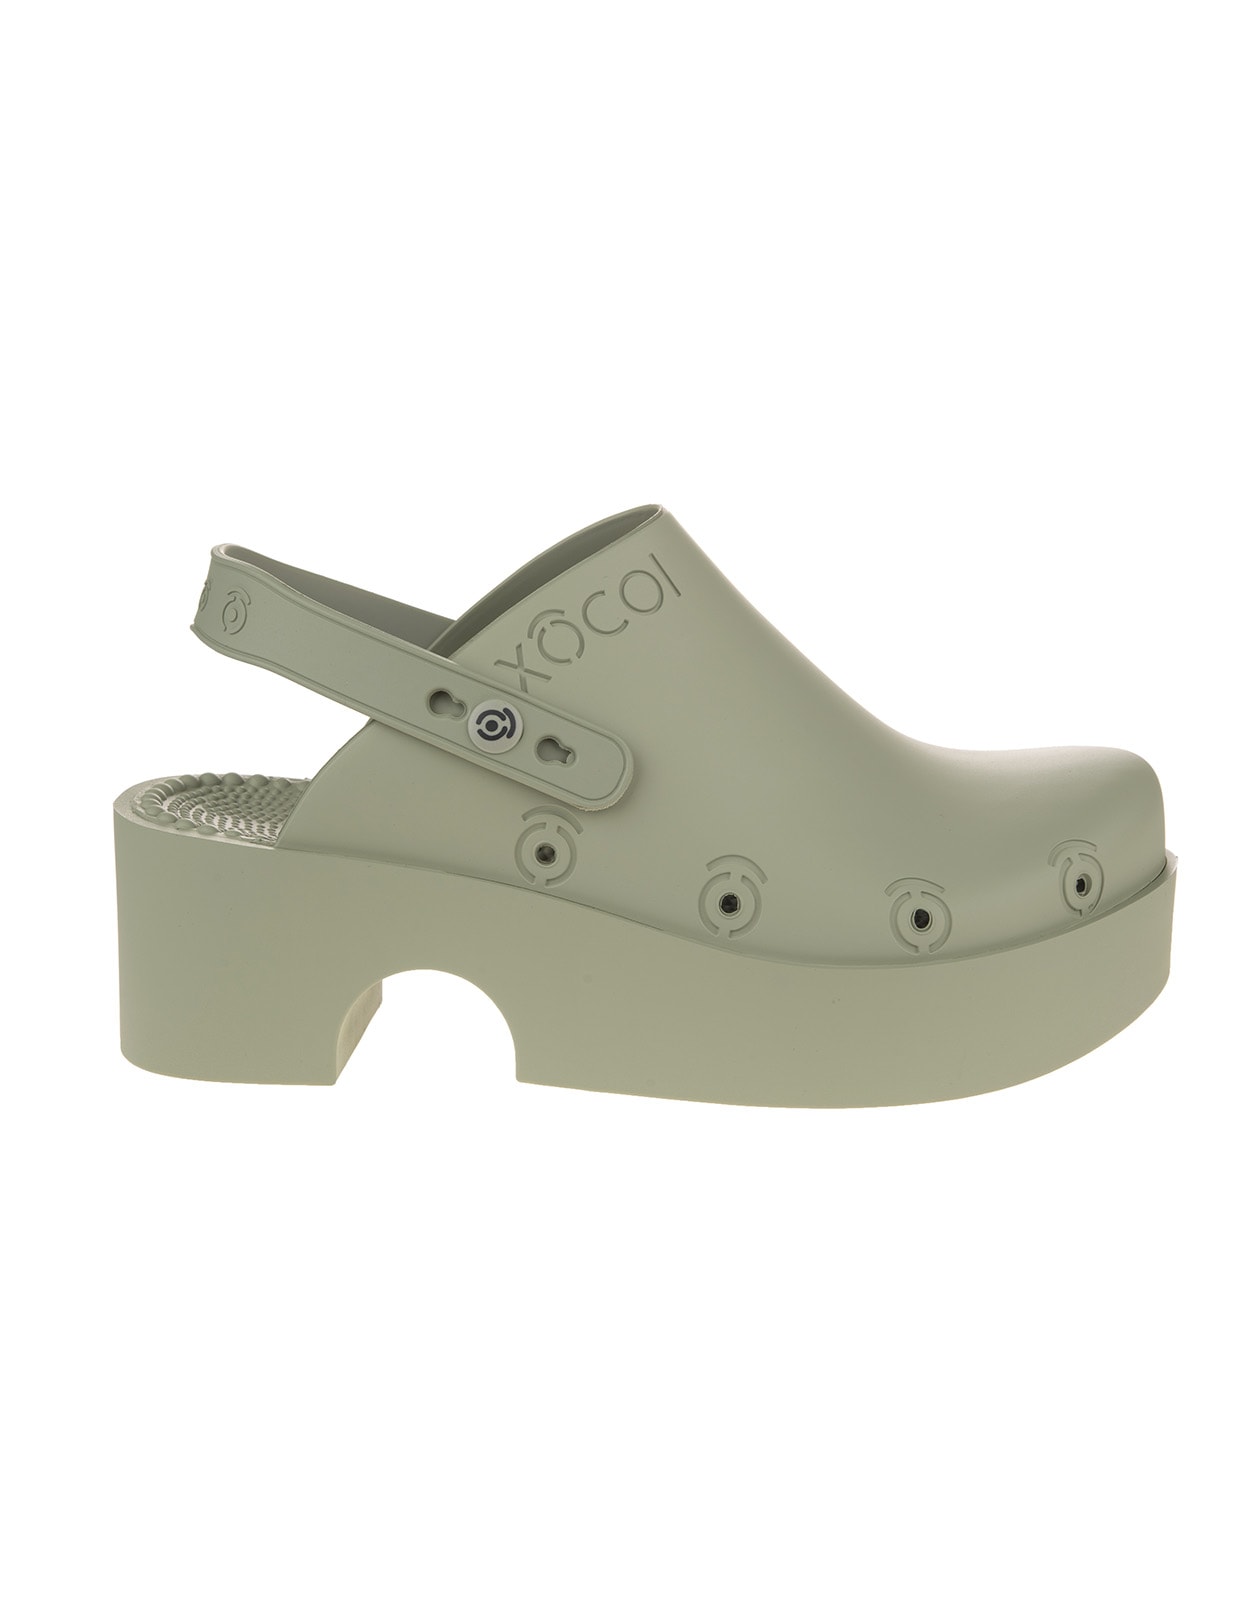 Xocoi Woman Slides In Military Green Recycled Rubber With Logo